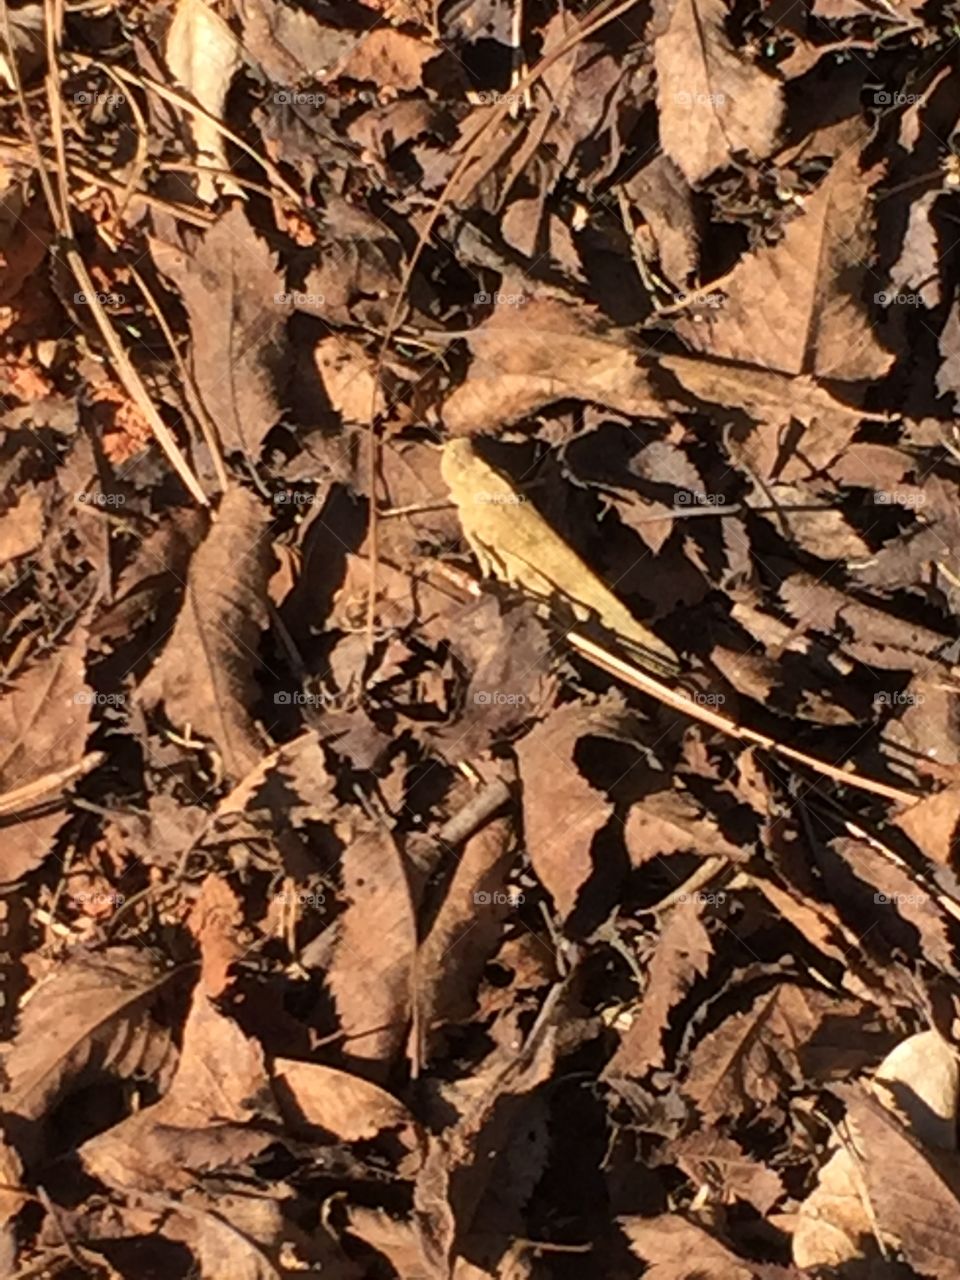 Grasshopper Incognito . Saw this little guy hiding among the leaves